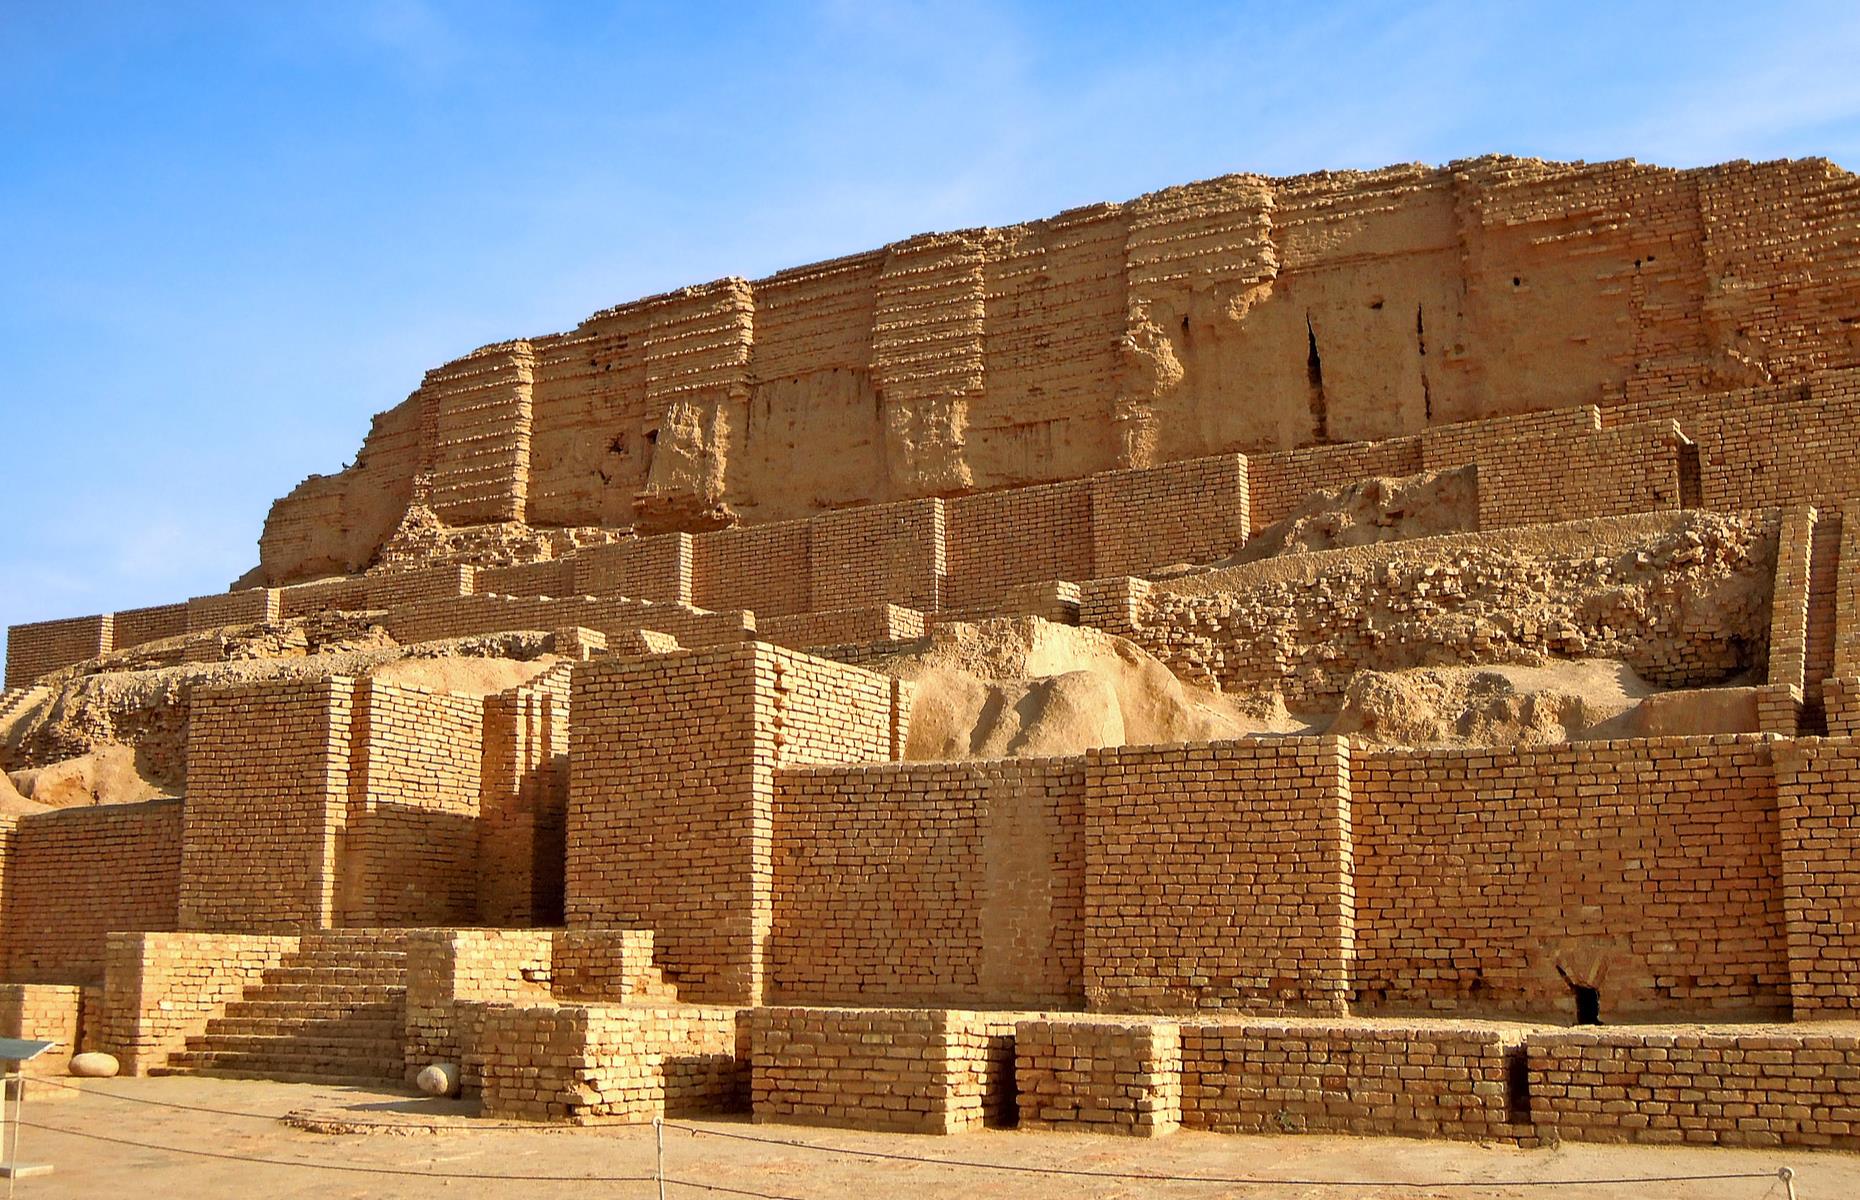 <p>At the heart of the site, which is thought to have been constructed as a sacred city around 1250 BC by Elamite king Untash-Napirisha, is a striking brick ziggurat (a terraced structure typical of the Mesopotamian civilisation). The main god honoured here was Inshushinak – one of the major deities of the Elamite religion – and it was used as a place both of worship and for burial.</p>